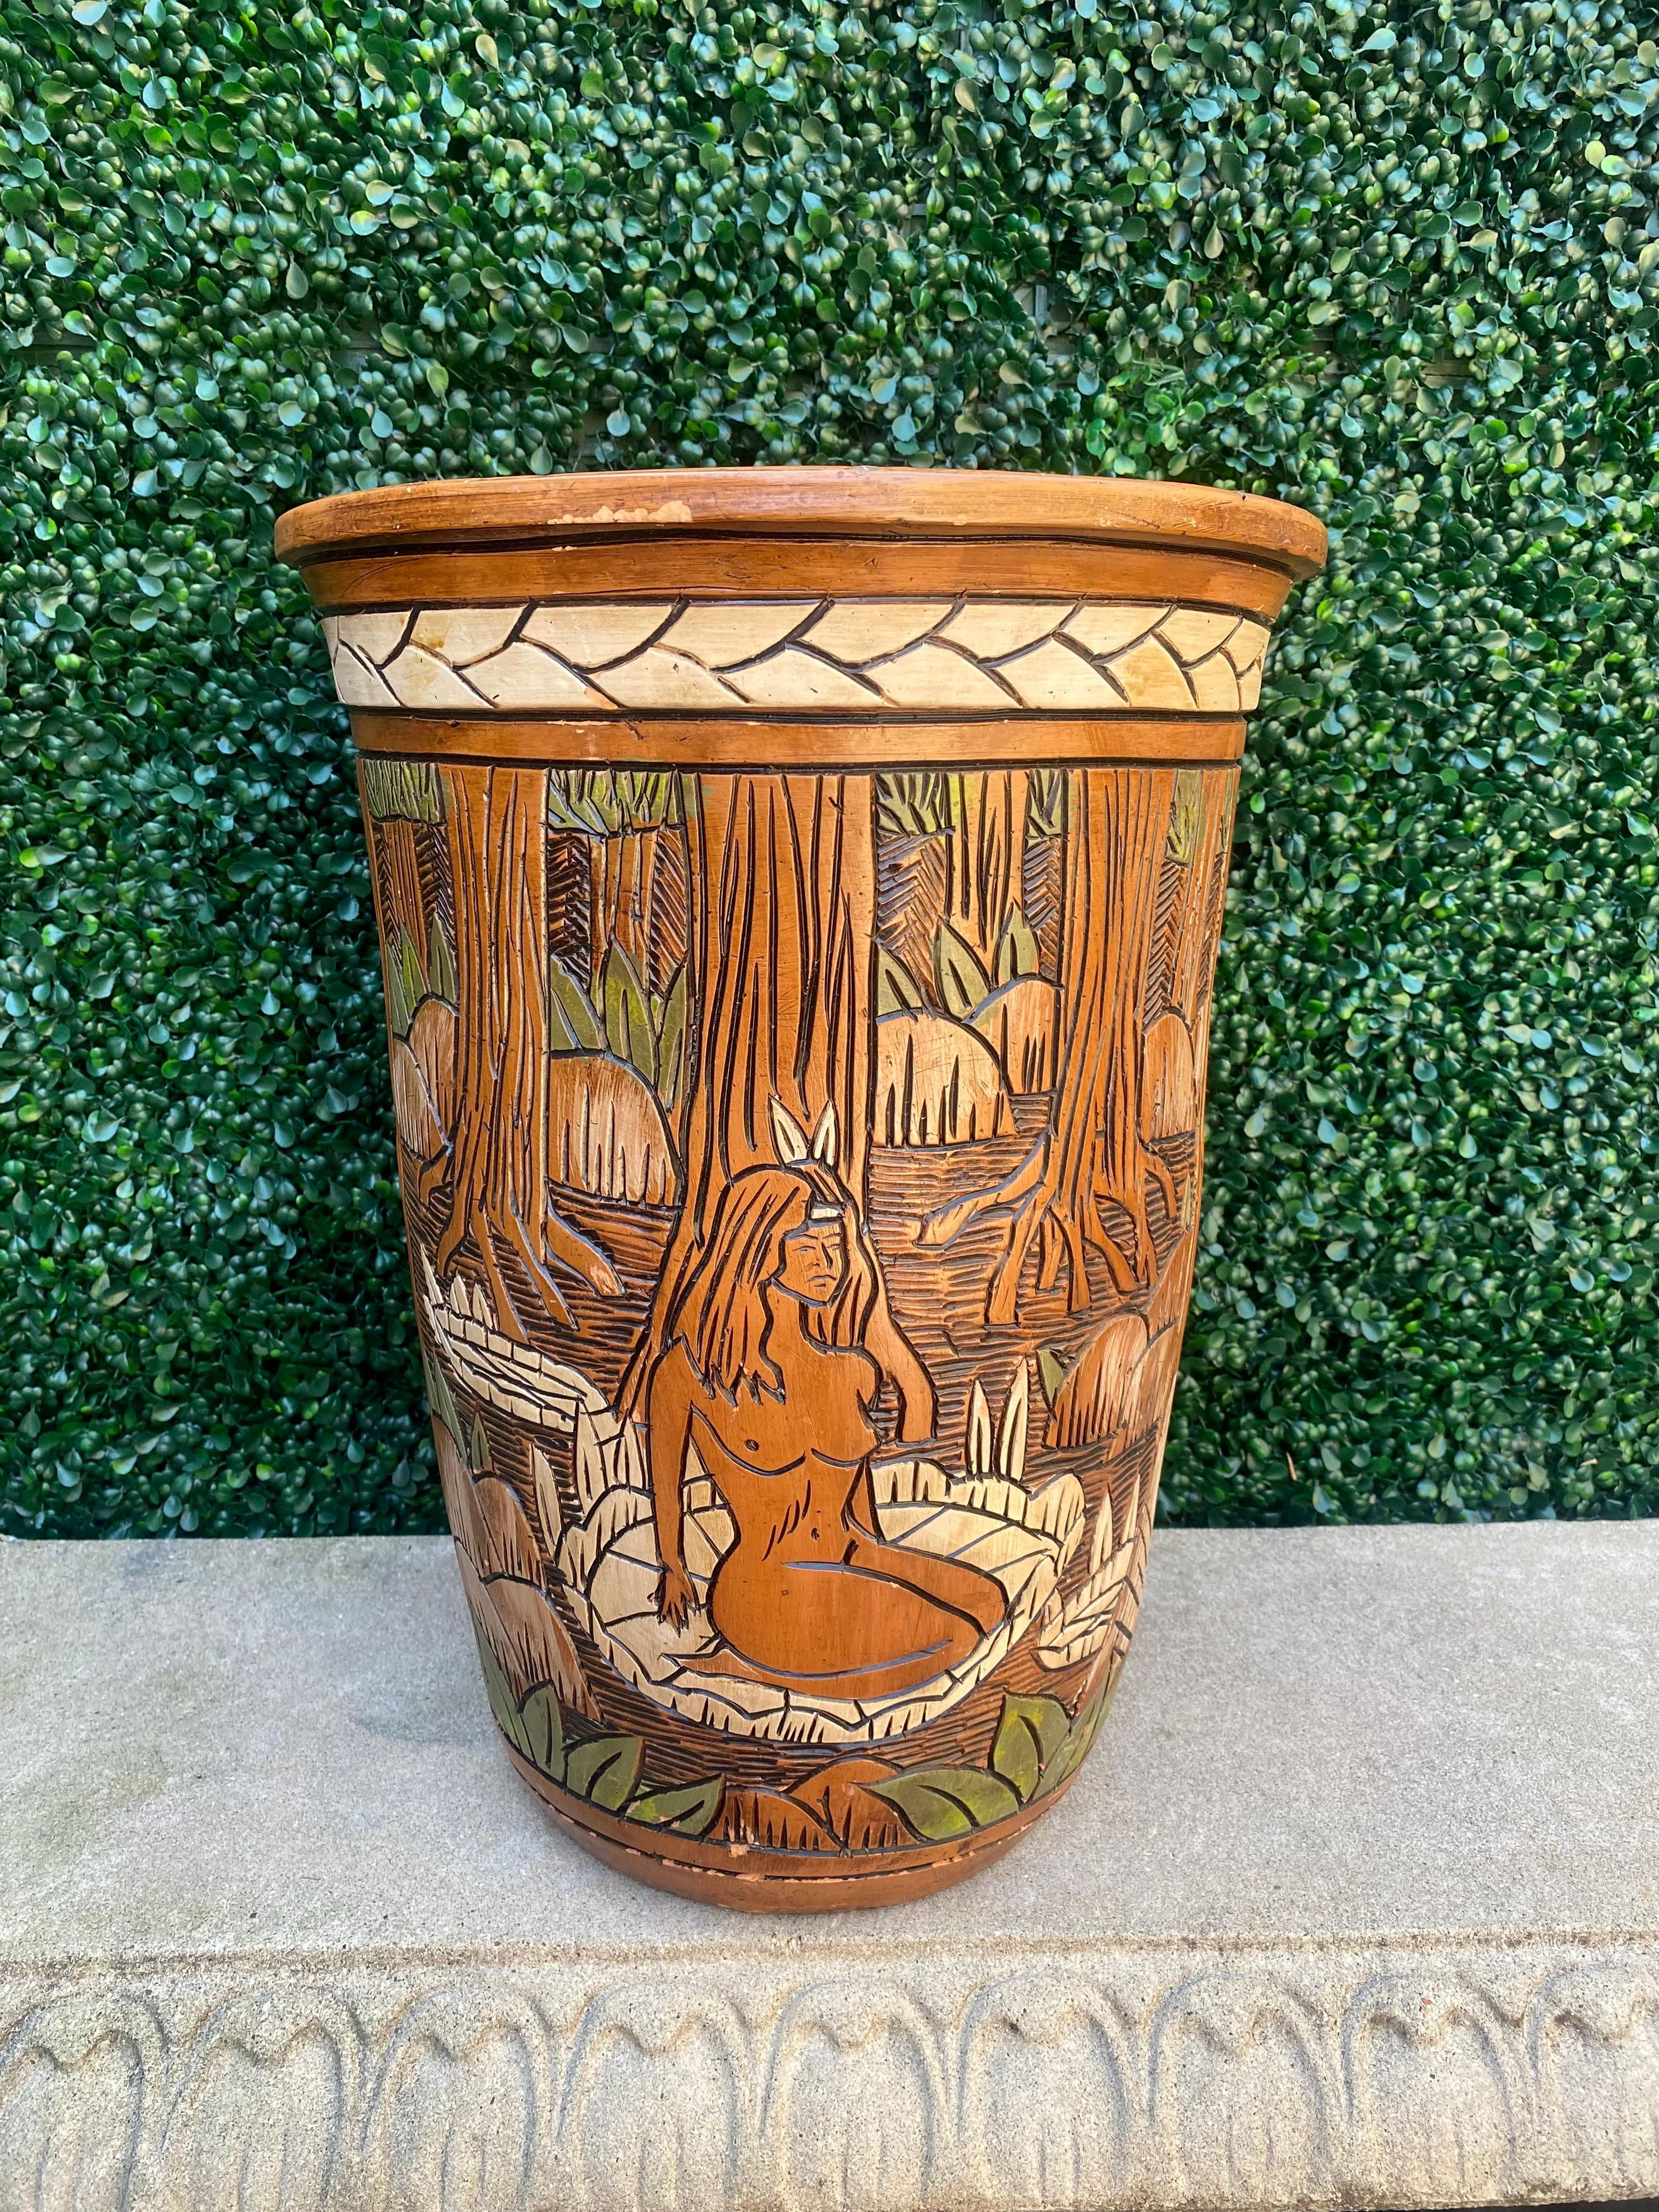 On offer on this occasion is one of the most stunning and rare, handmade and painted vase  you could hope to find. Outstanding design is exhibited throughout. The beautiful vase is statement piece. Just look at the gorgeous details on this beauty!